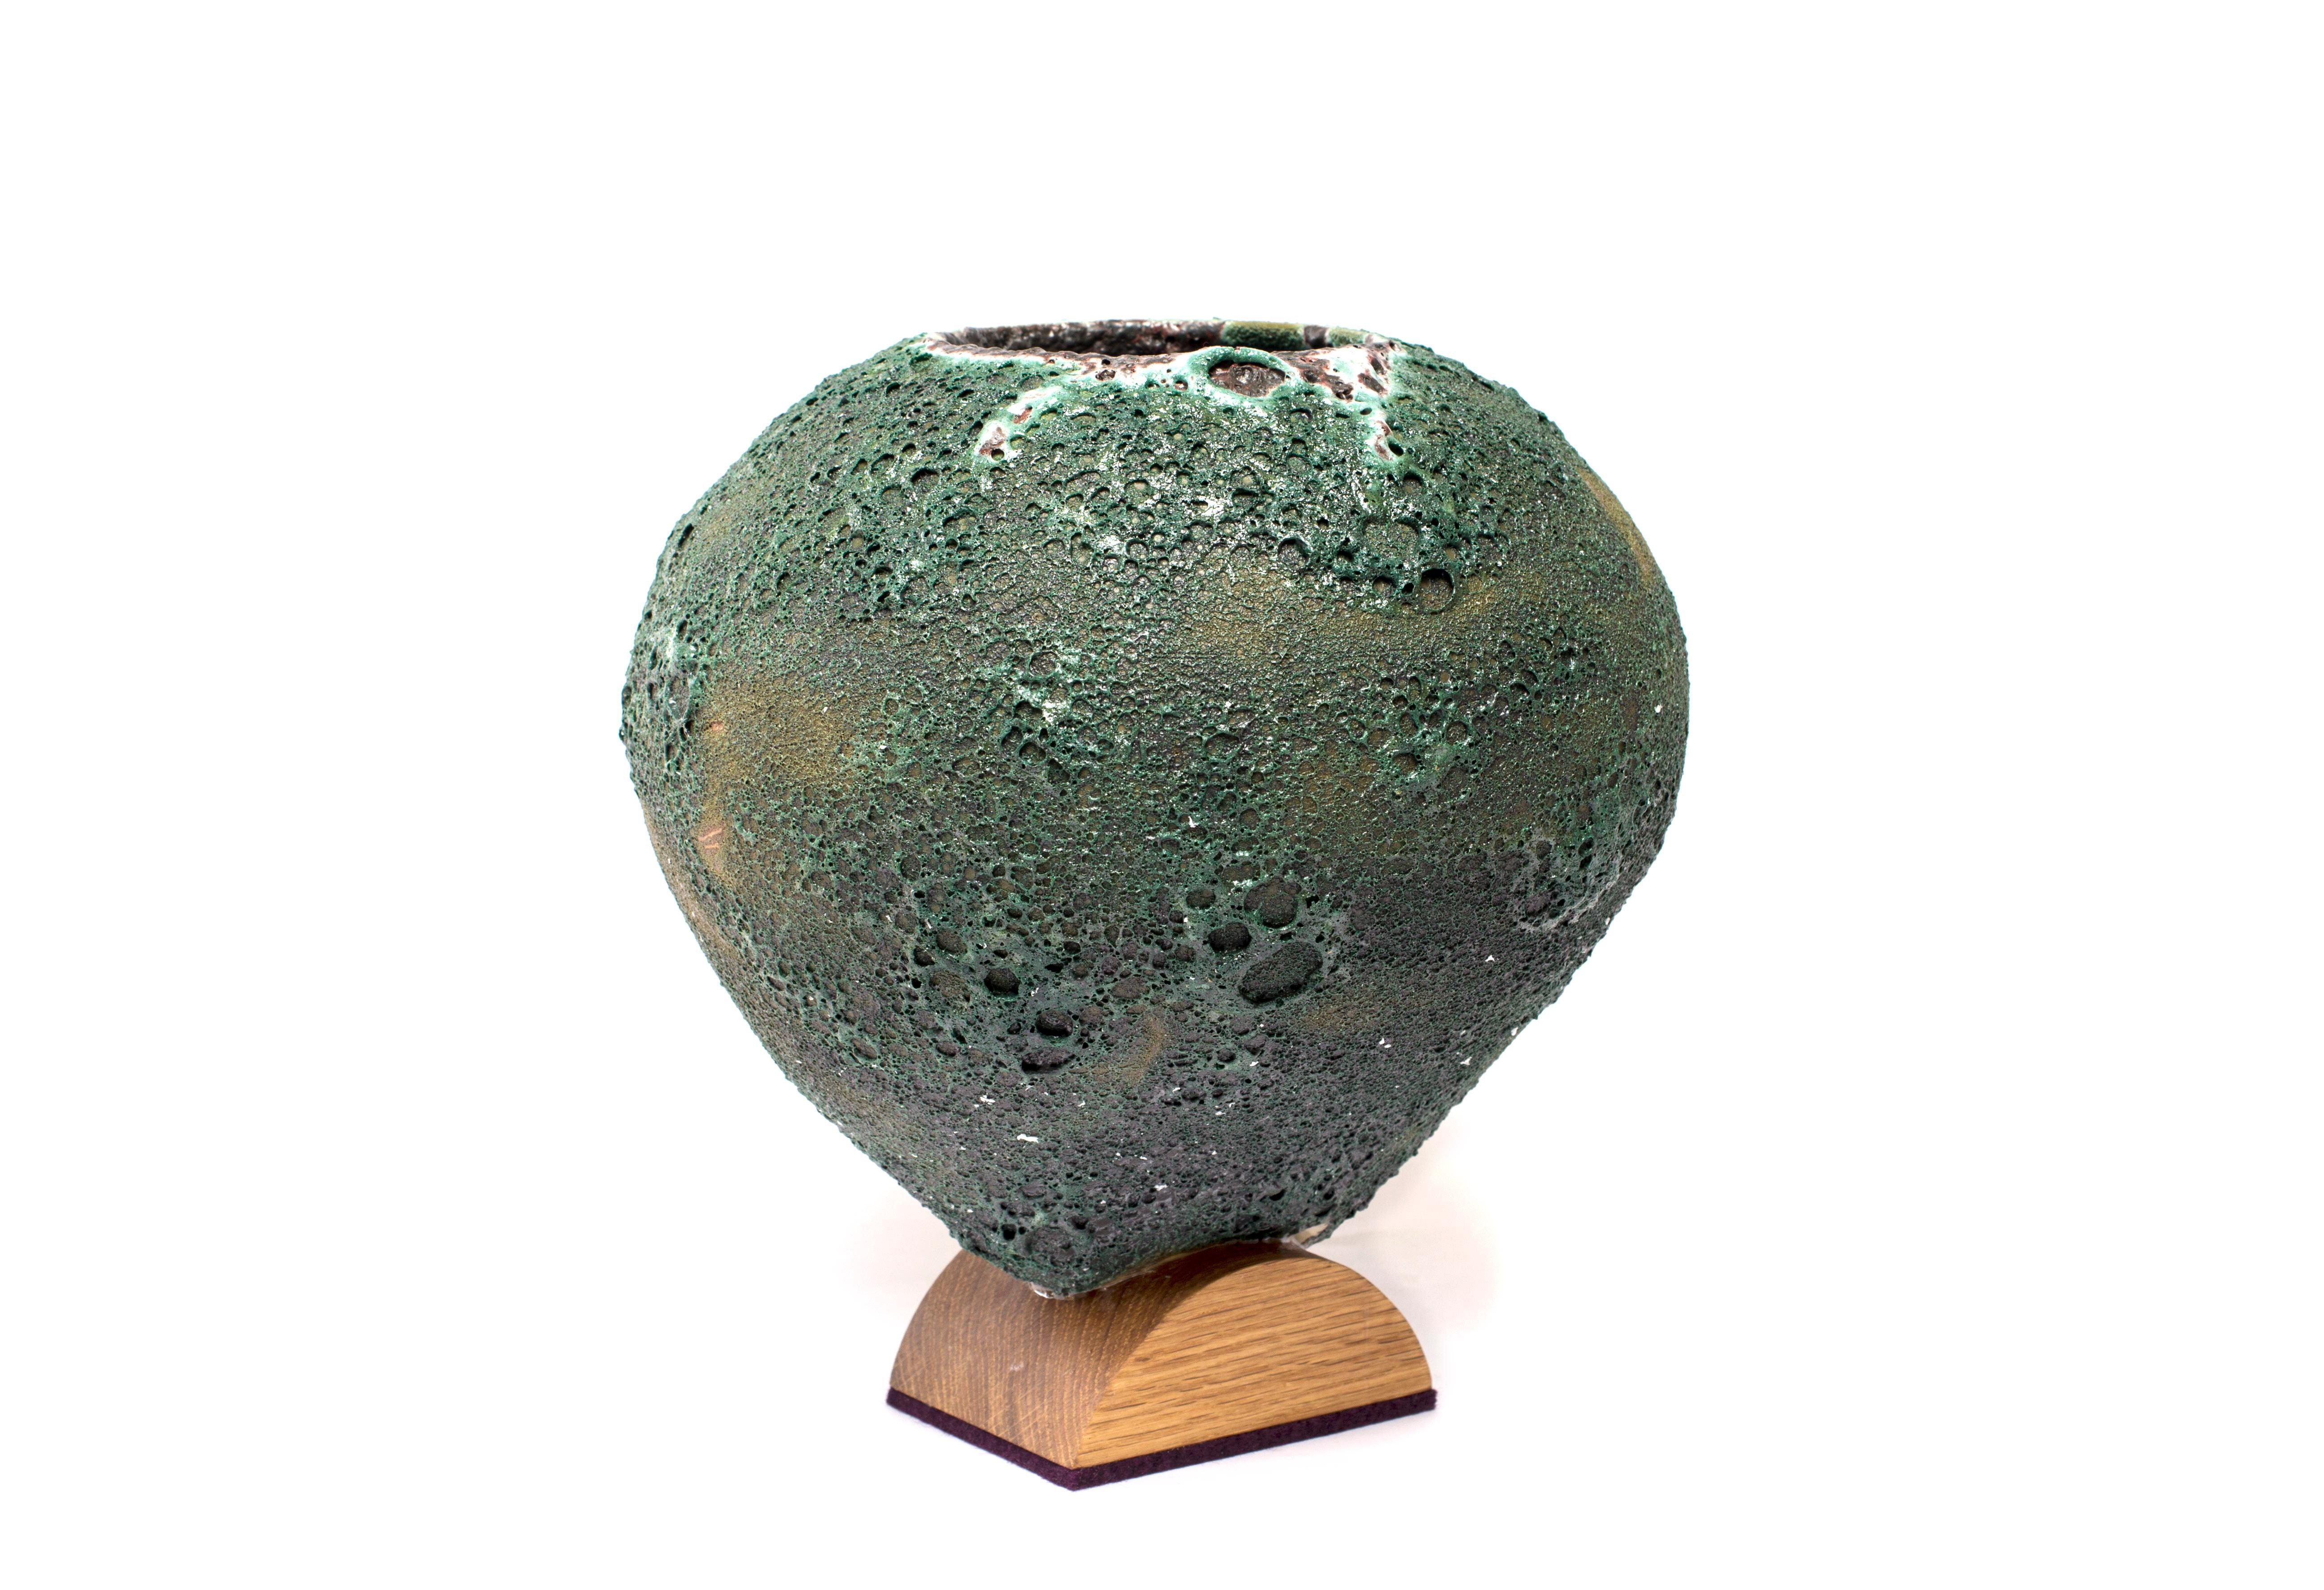 Aaron Poritz

Trophies
Ceramic and glaze, 2018
Measures: Small, without wood approximate 6